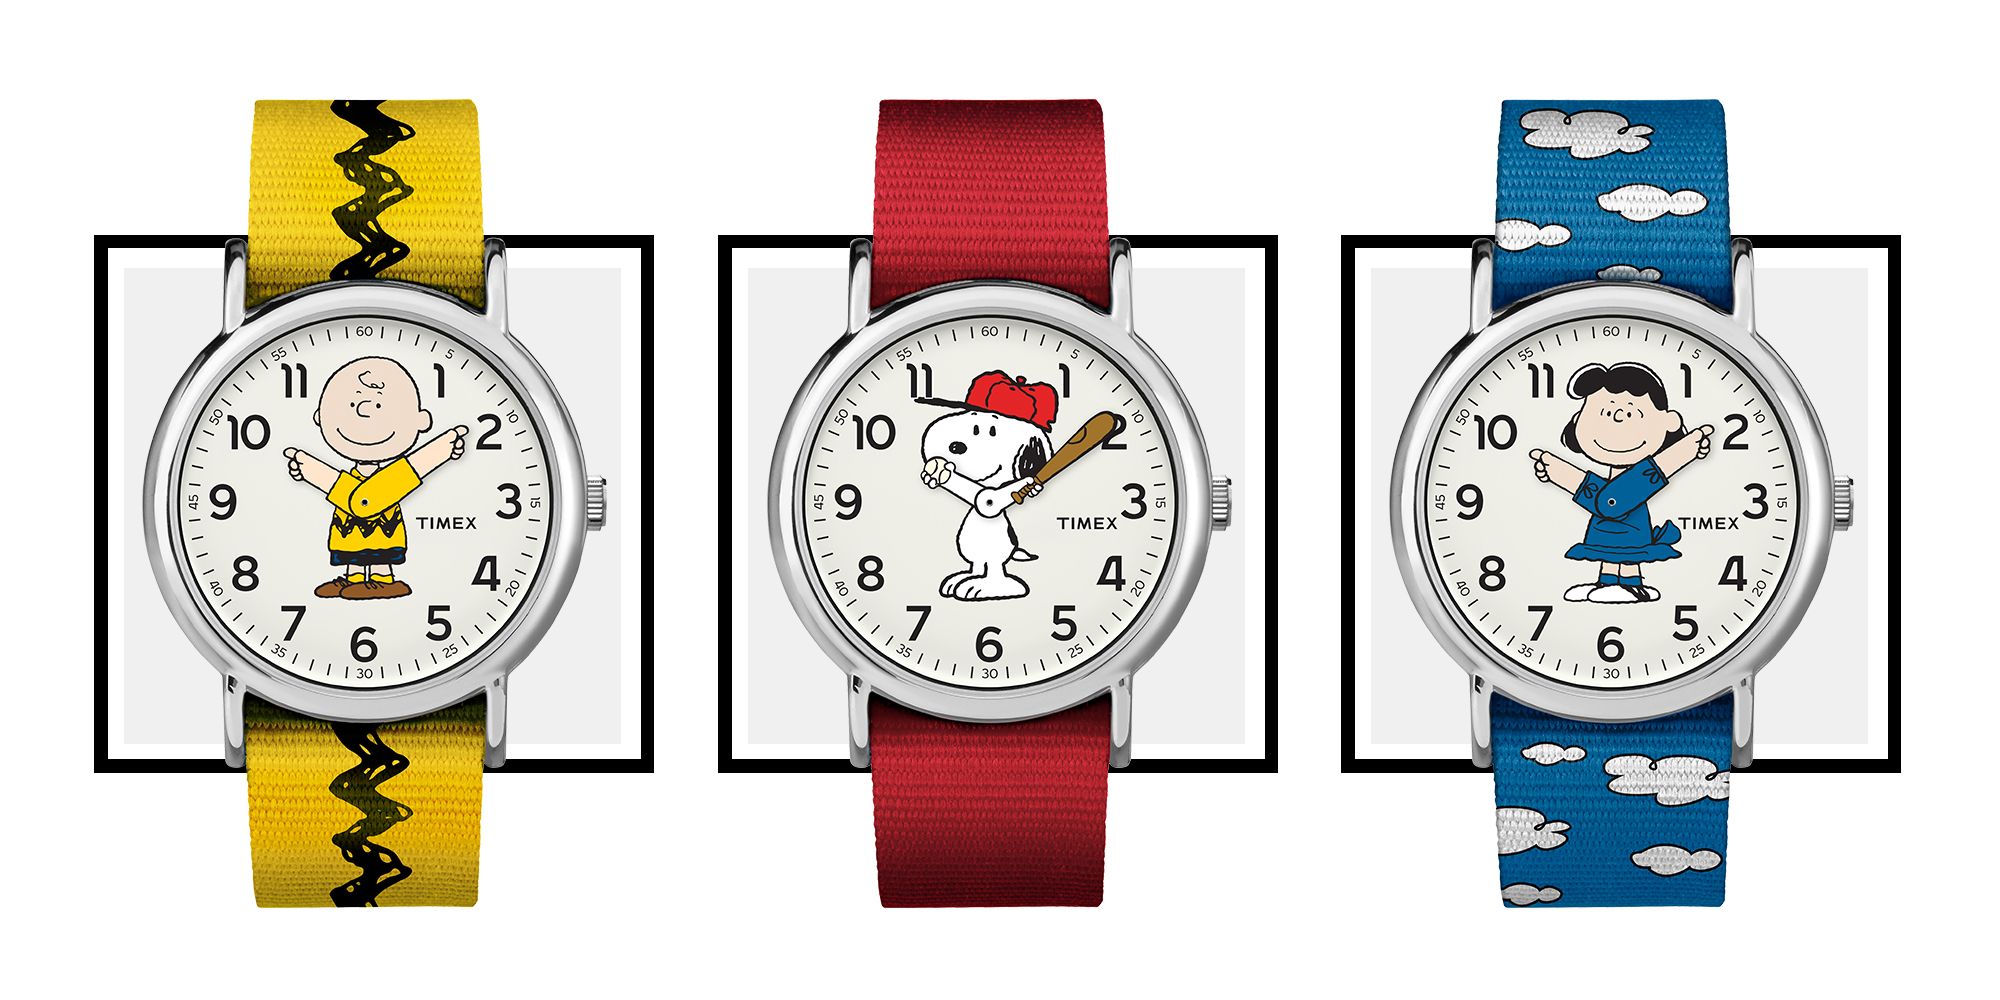 Timex Peanuts Watches | vlr.eng.br